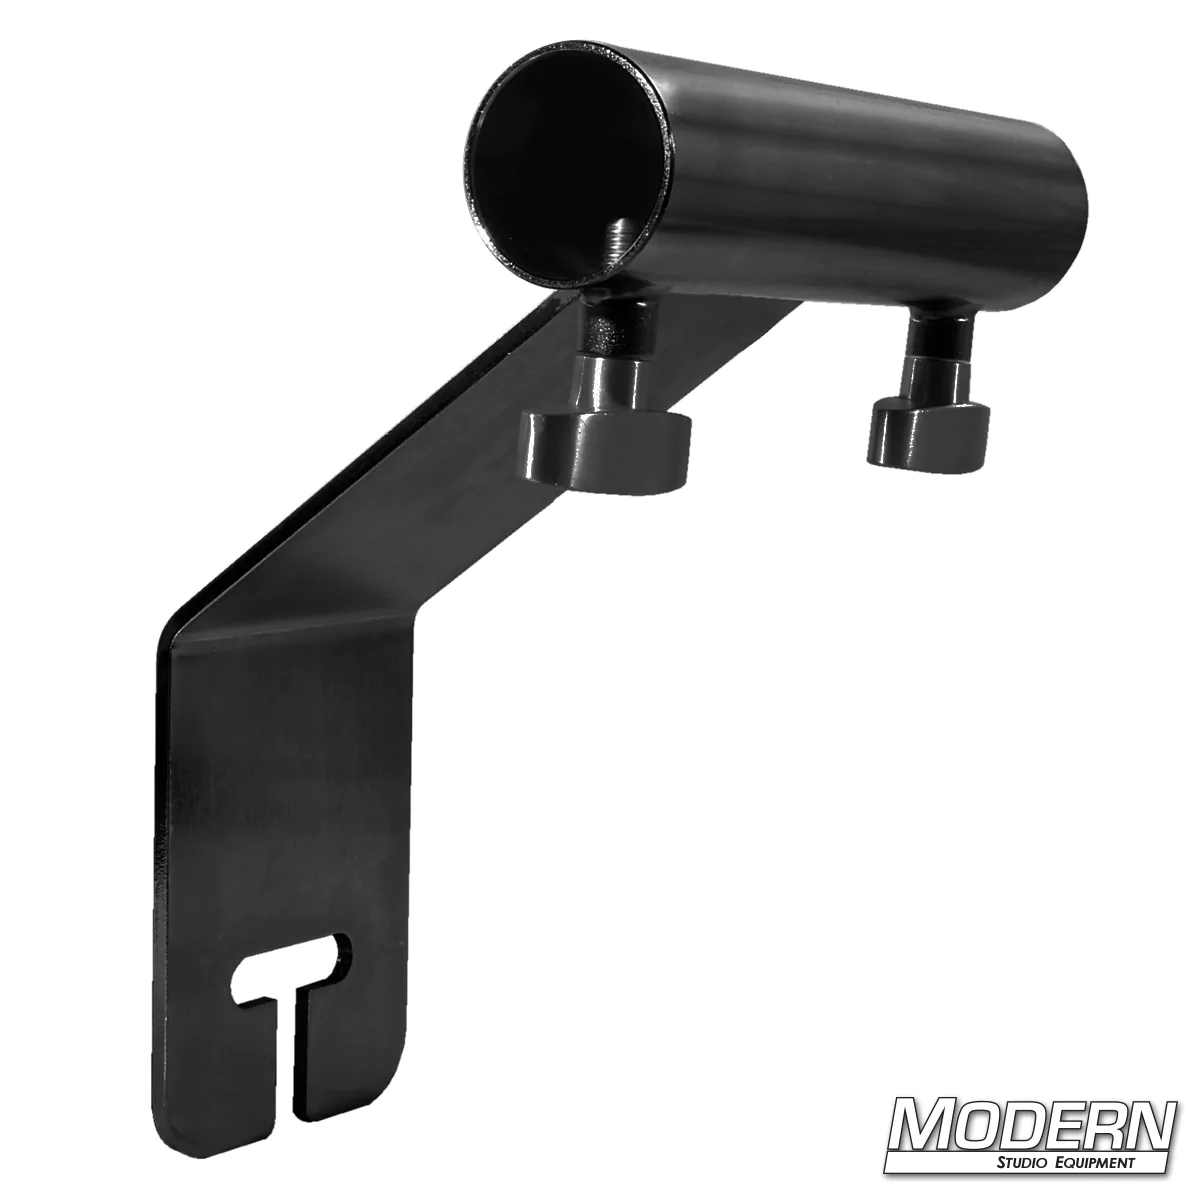 Offset Ear for 1-1/4" Speed-Rail® - Black Zinc with T-Handles